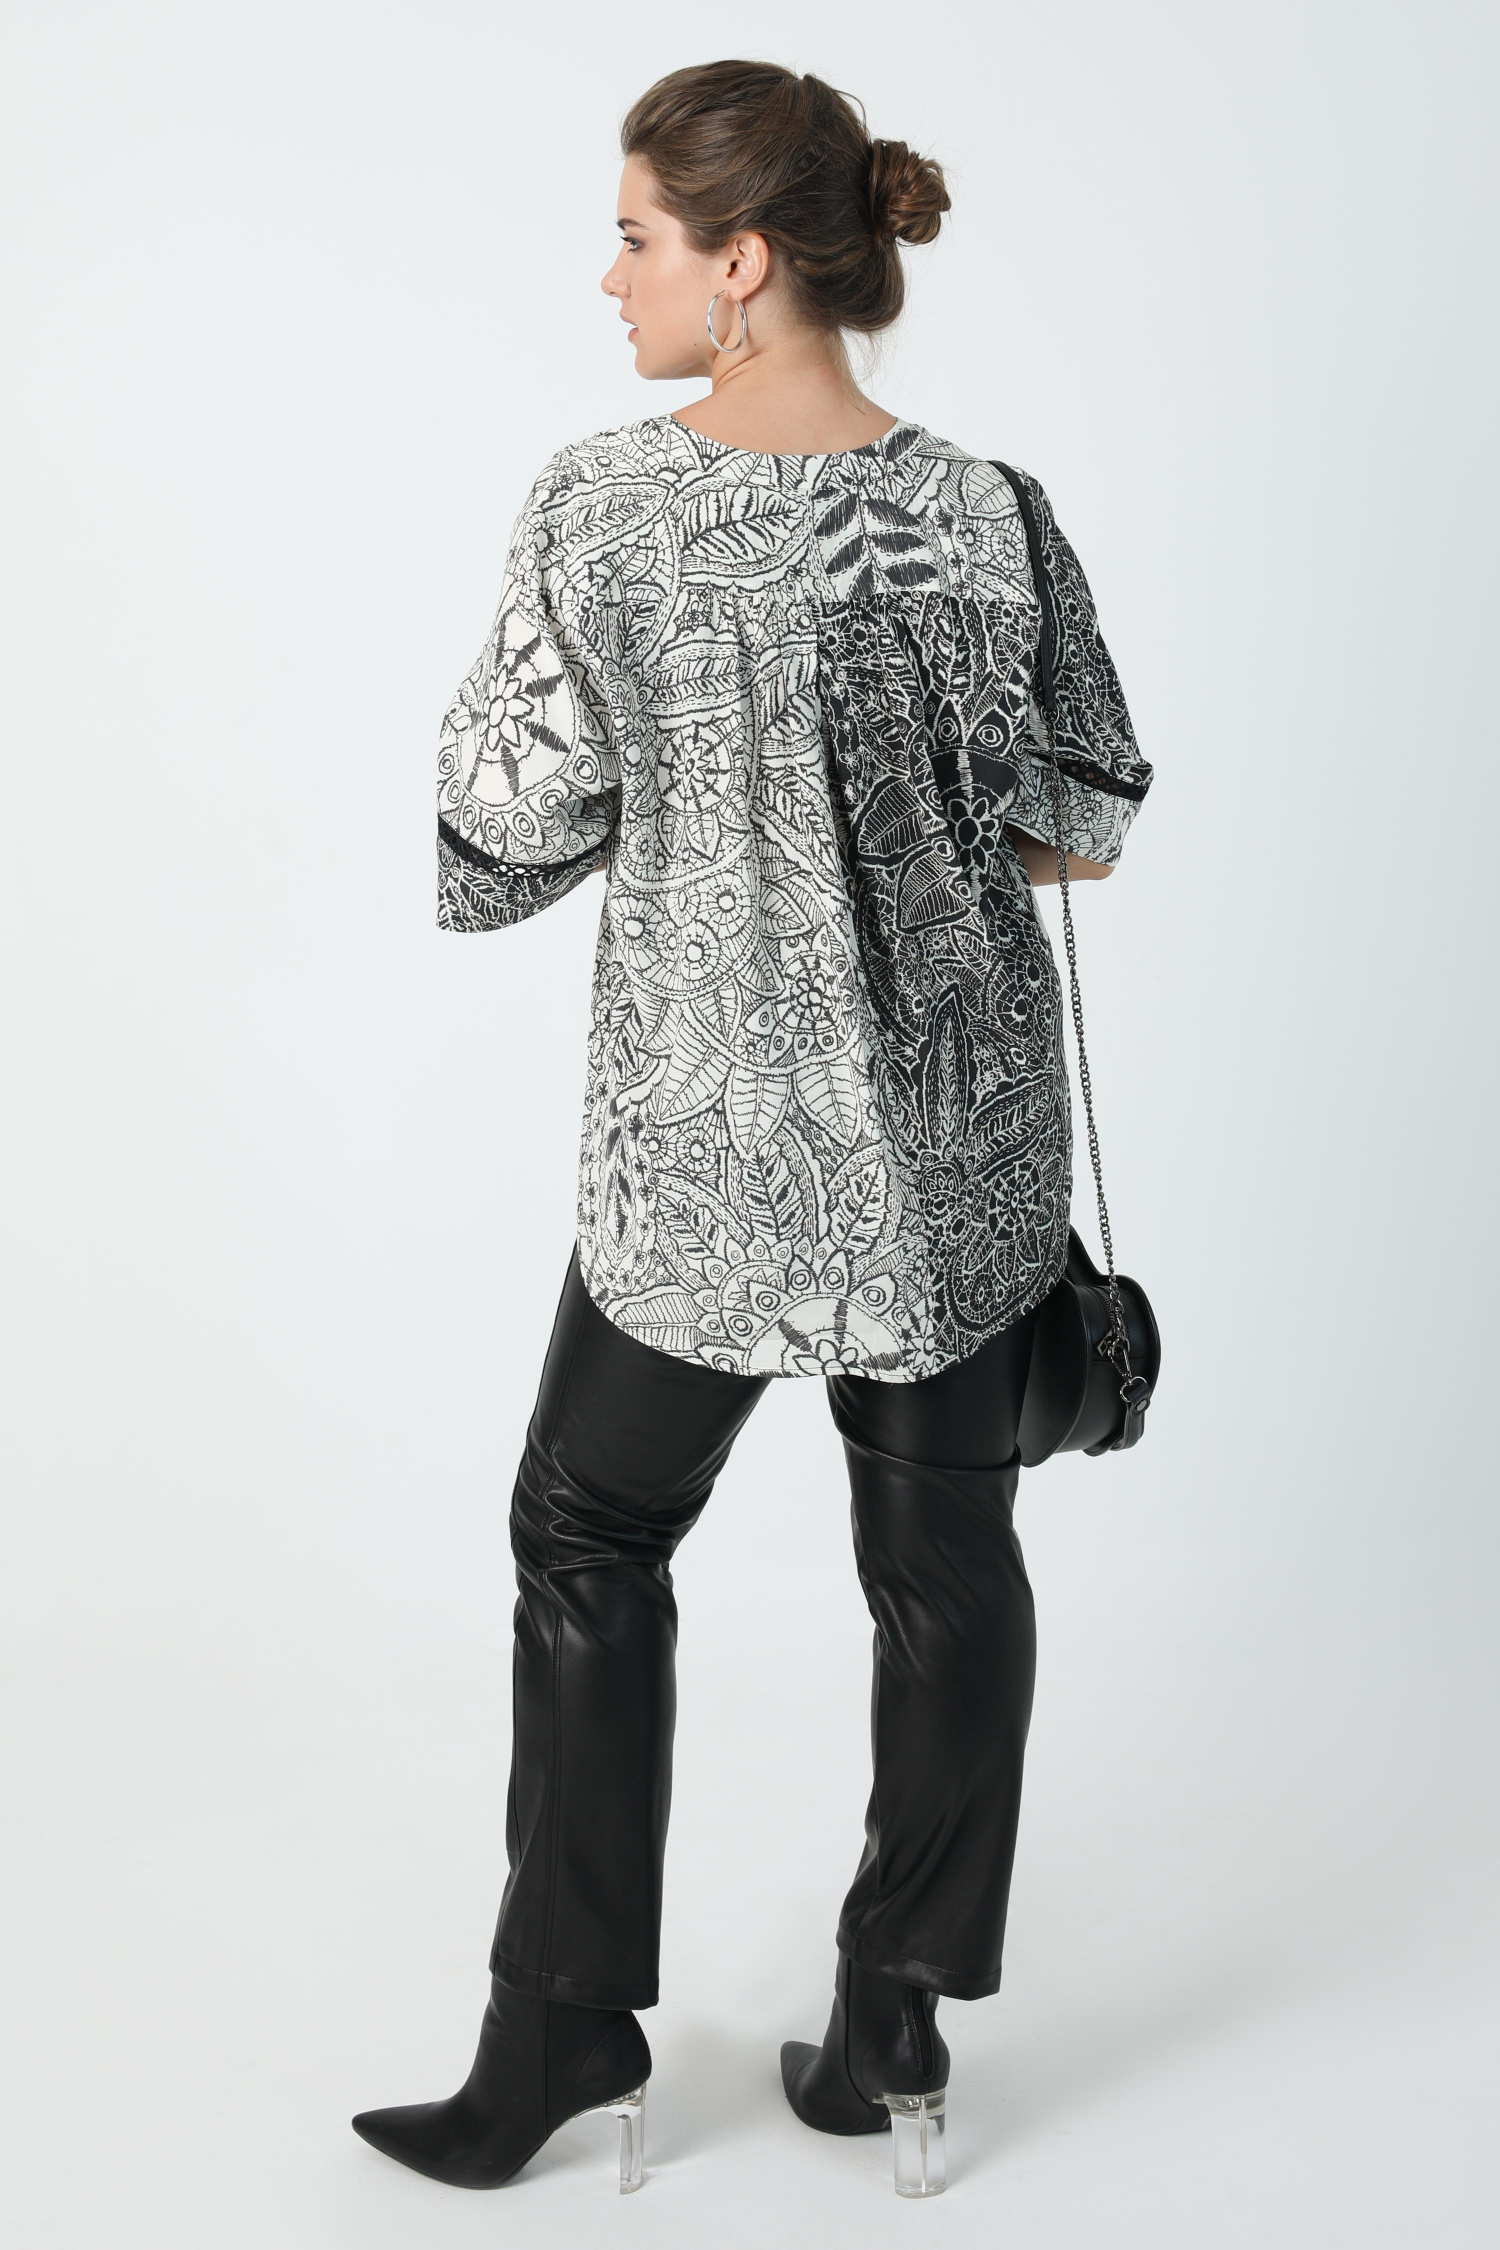 Black and white floral print blouse in oeko-tex fabric